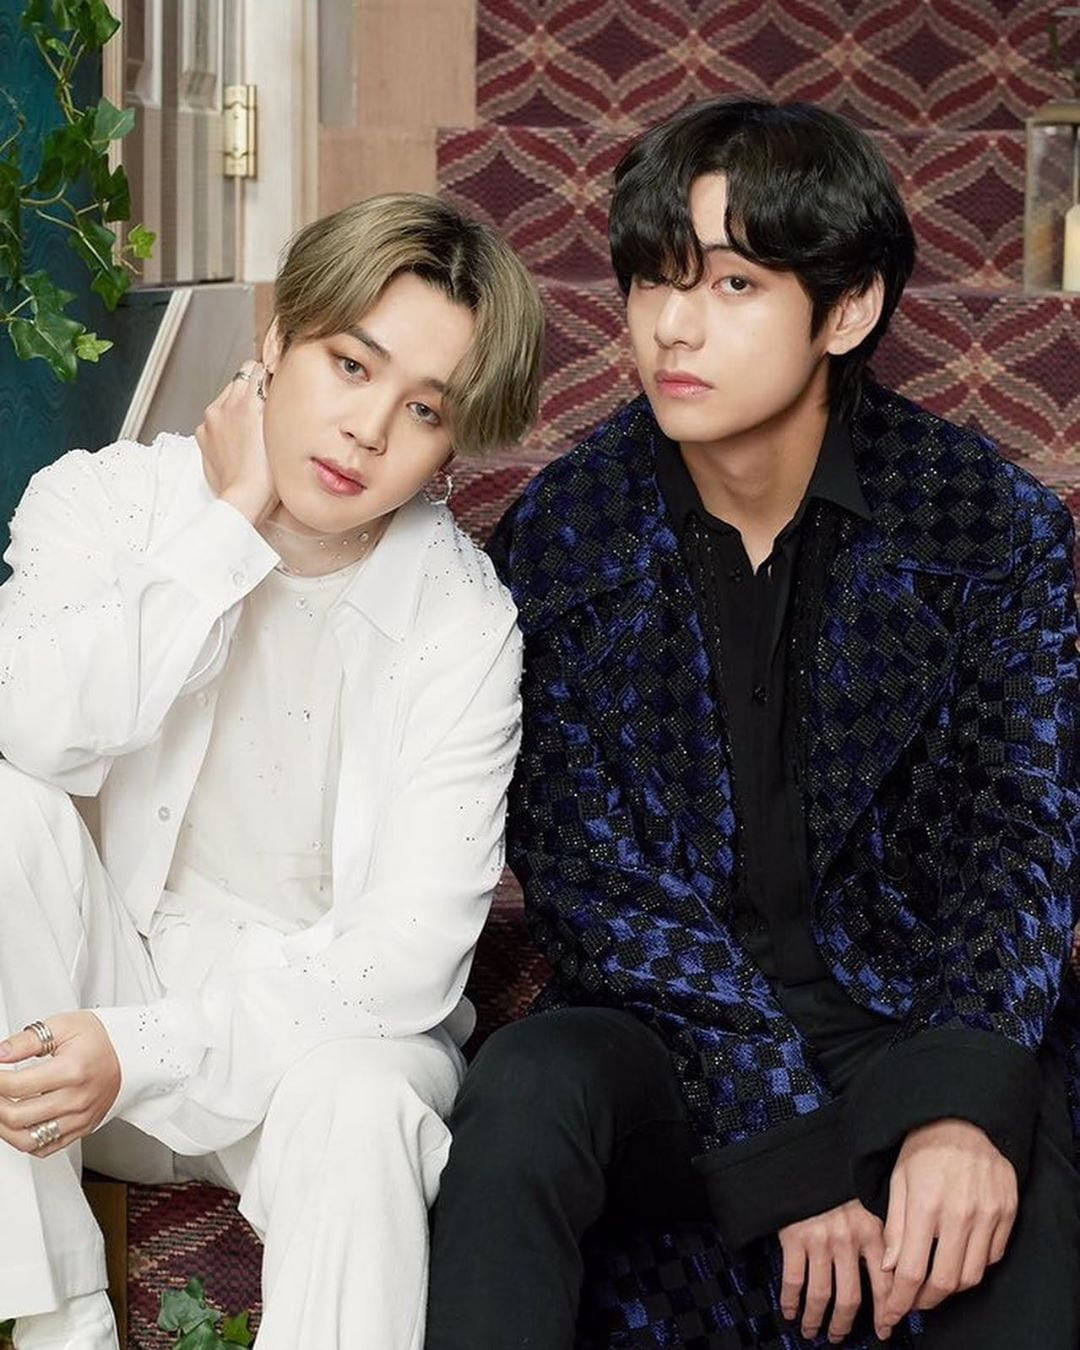 Dynamic Duo - Vmin In Contrasting Colors Wallpaper